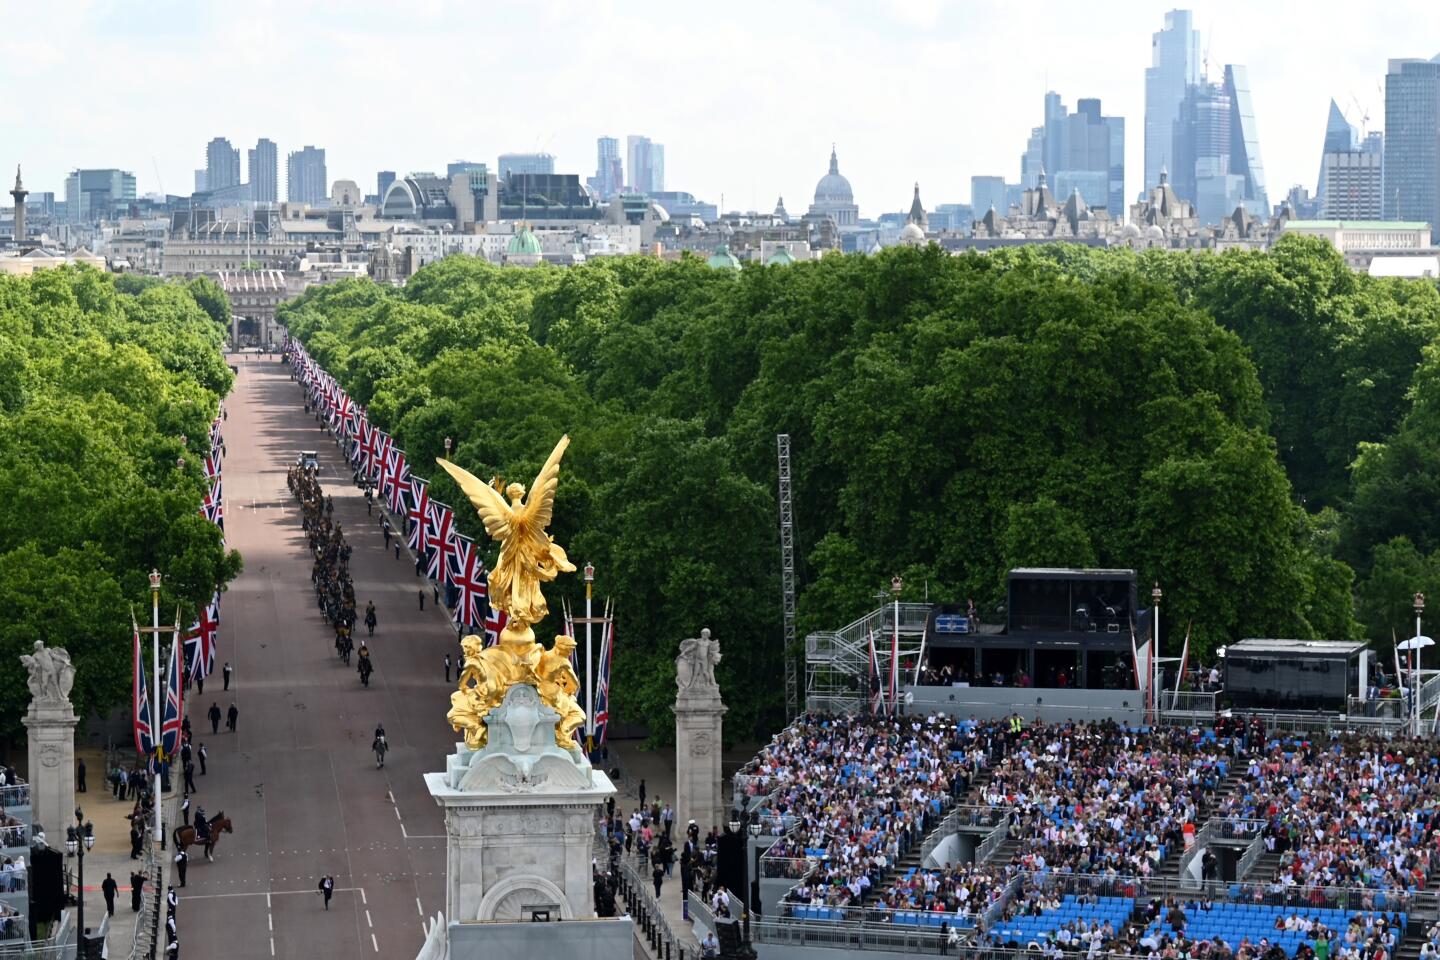 Members of the public watch from stands on the Mall during the queen's birthday parade.